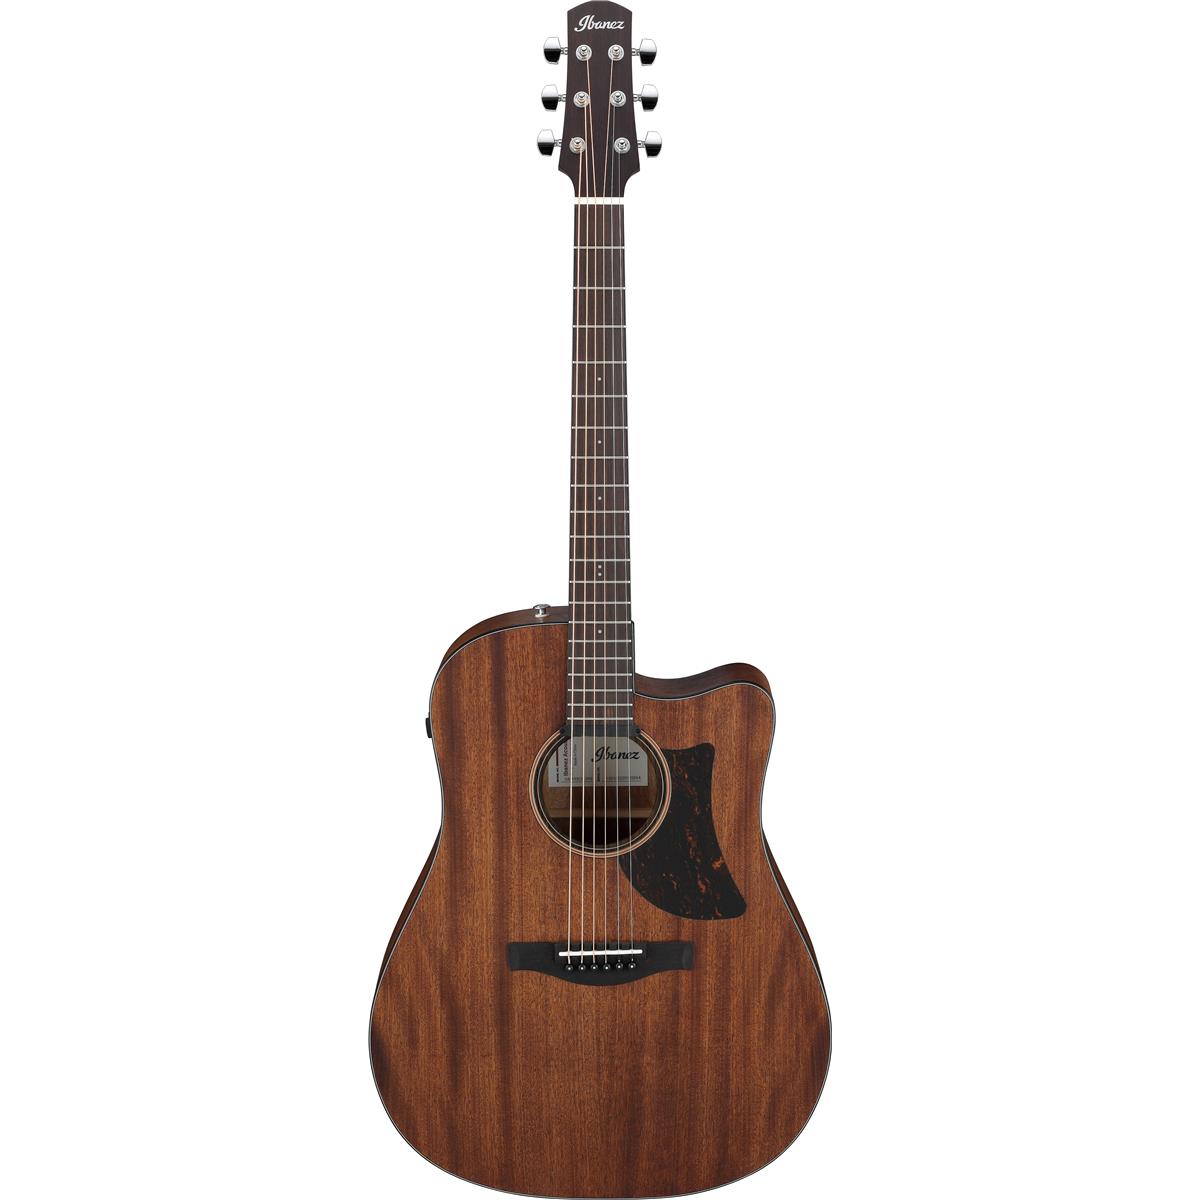 

Ibanez Advanced Acoustic AAD190CE Acoustic Electric Guitar, Open Pore Natural